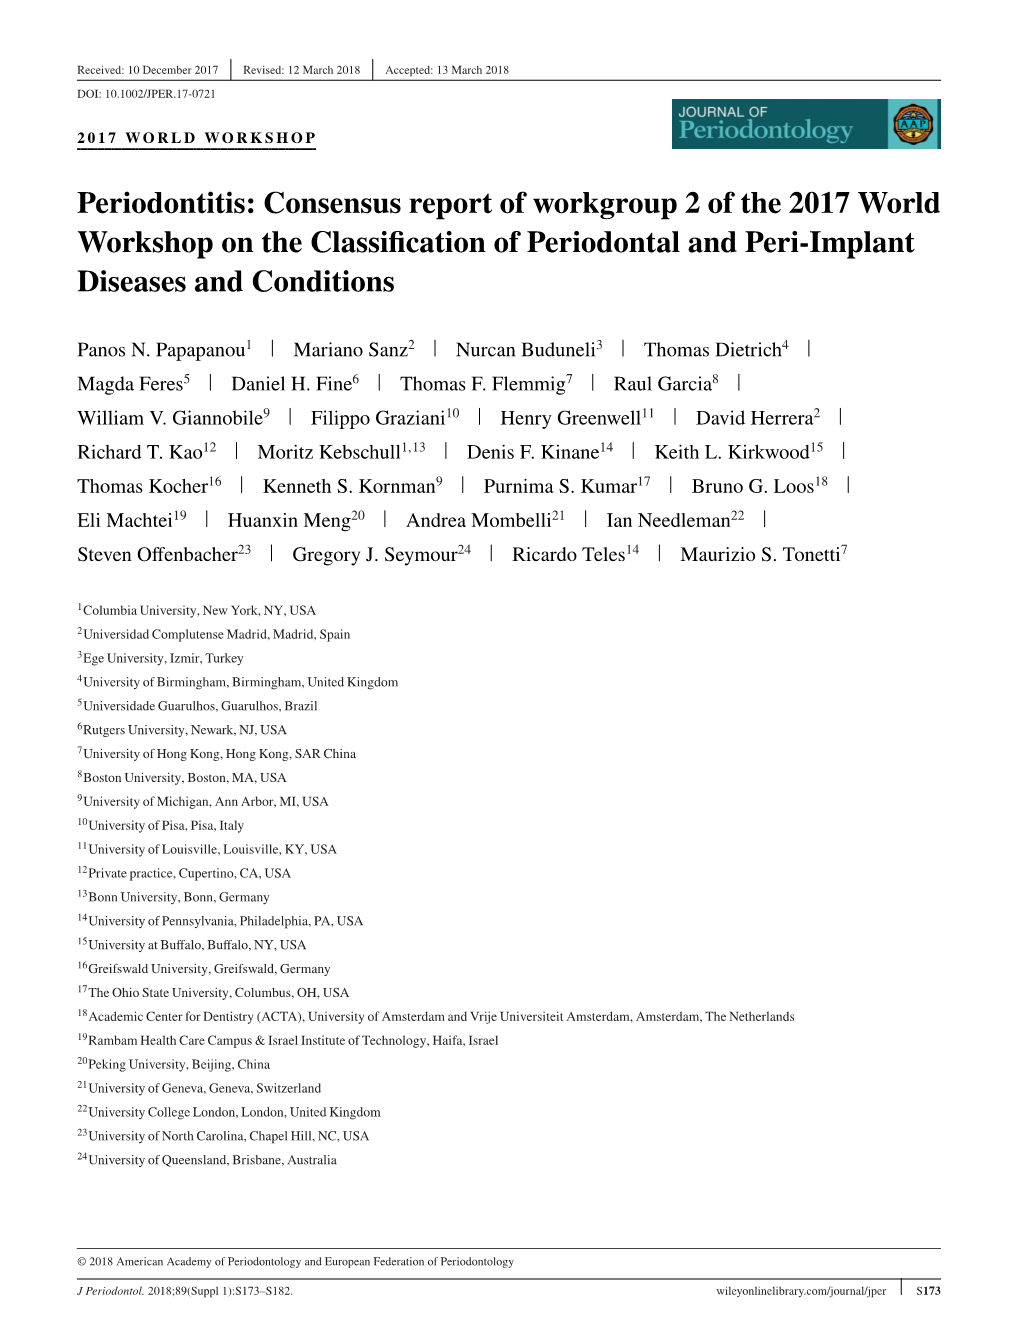 Periodontitis: Consensus Report of Workgroup 2 of the 2017 World Workshop on the Classiﬁcation of Periodontal and Peri-Implant Diseases and Conditions